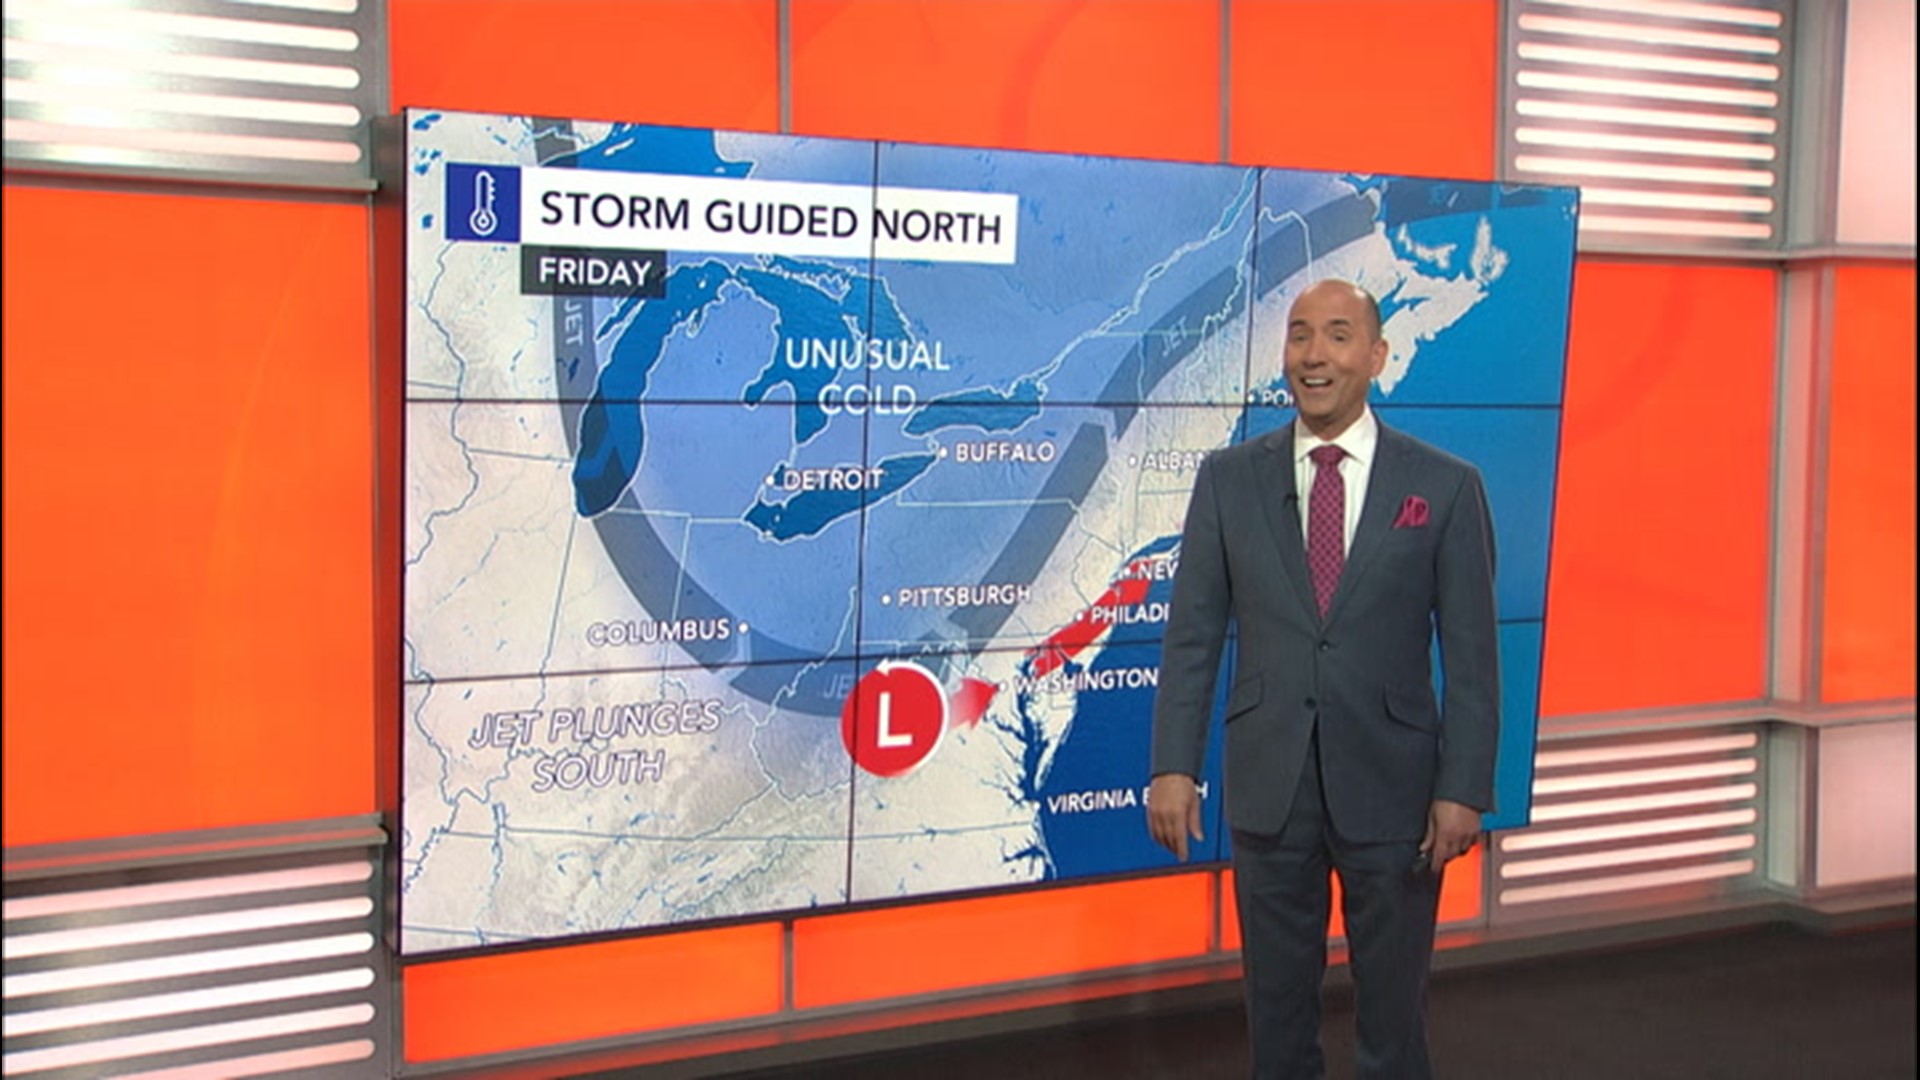 AccuWeather Chief Broadcast Meteorologist Bernie Rayno has the forecast for where and when rare May snow will fall across the Northeast, as well as which cities could set record lows.